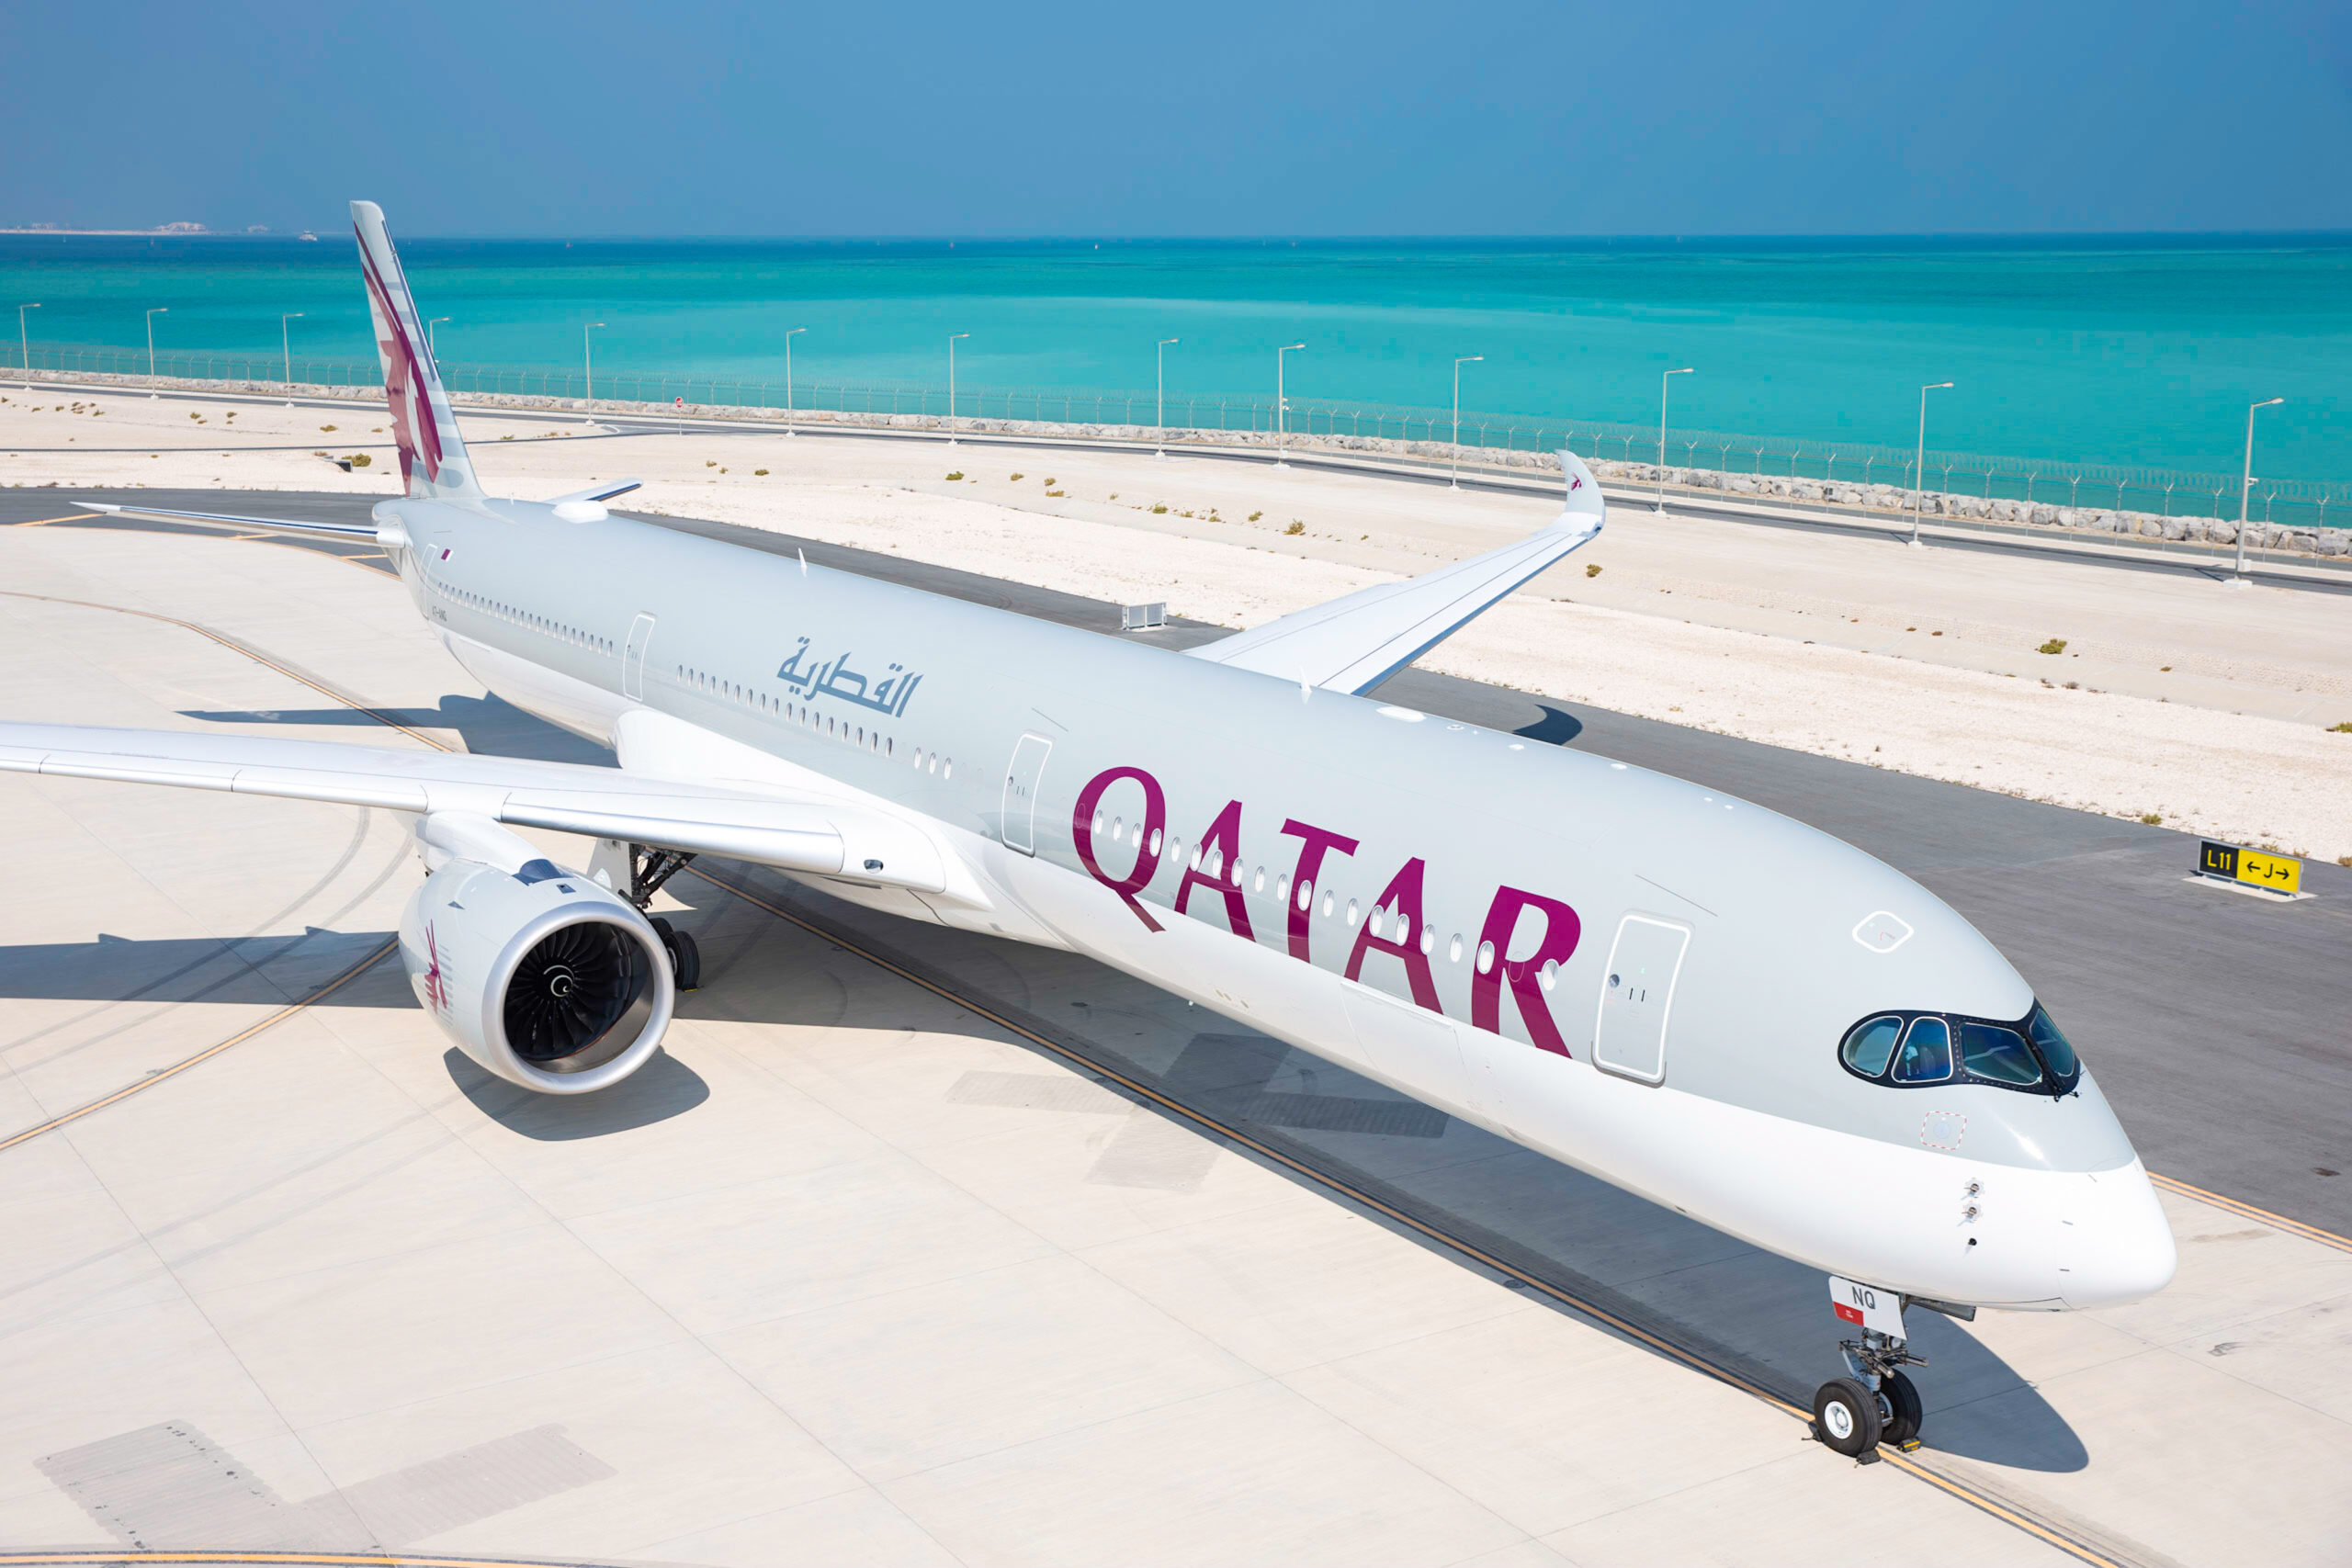 PICTURE OF A QATAR AIRCRAFT.